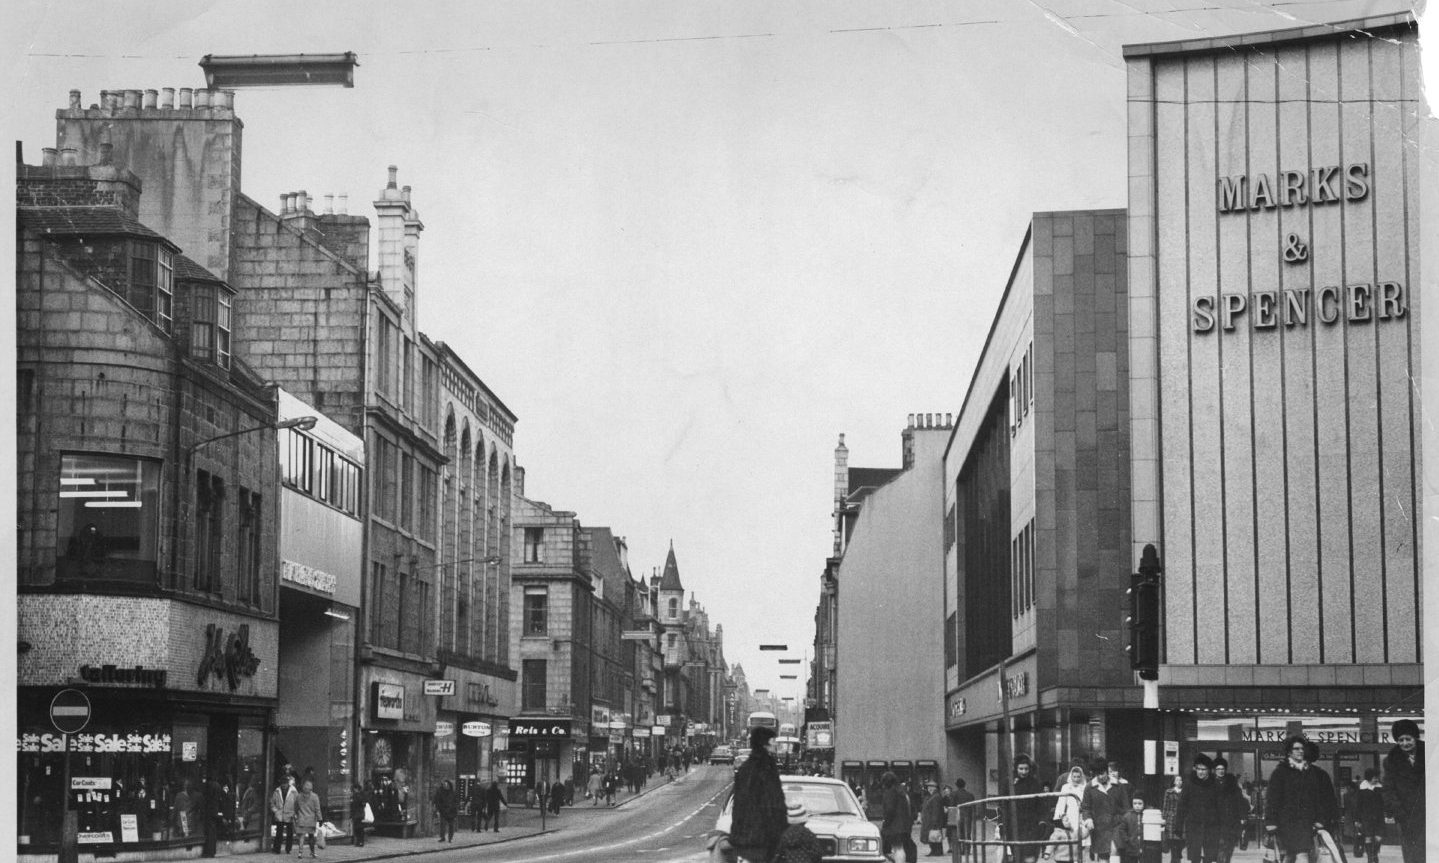 A photo of M&S in Aberdeen city centre in 1973